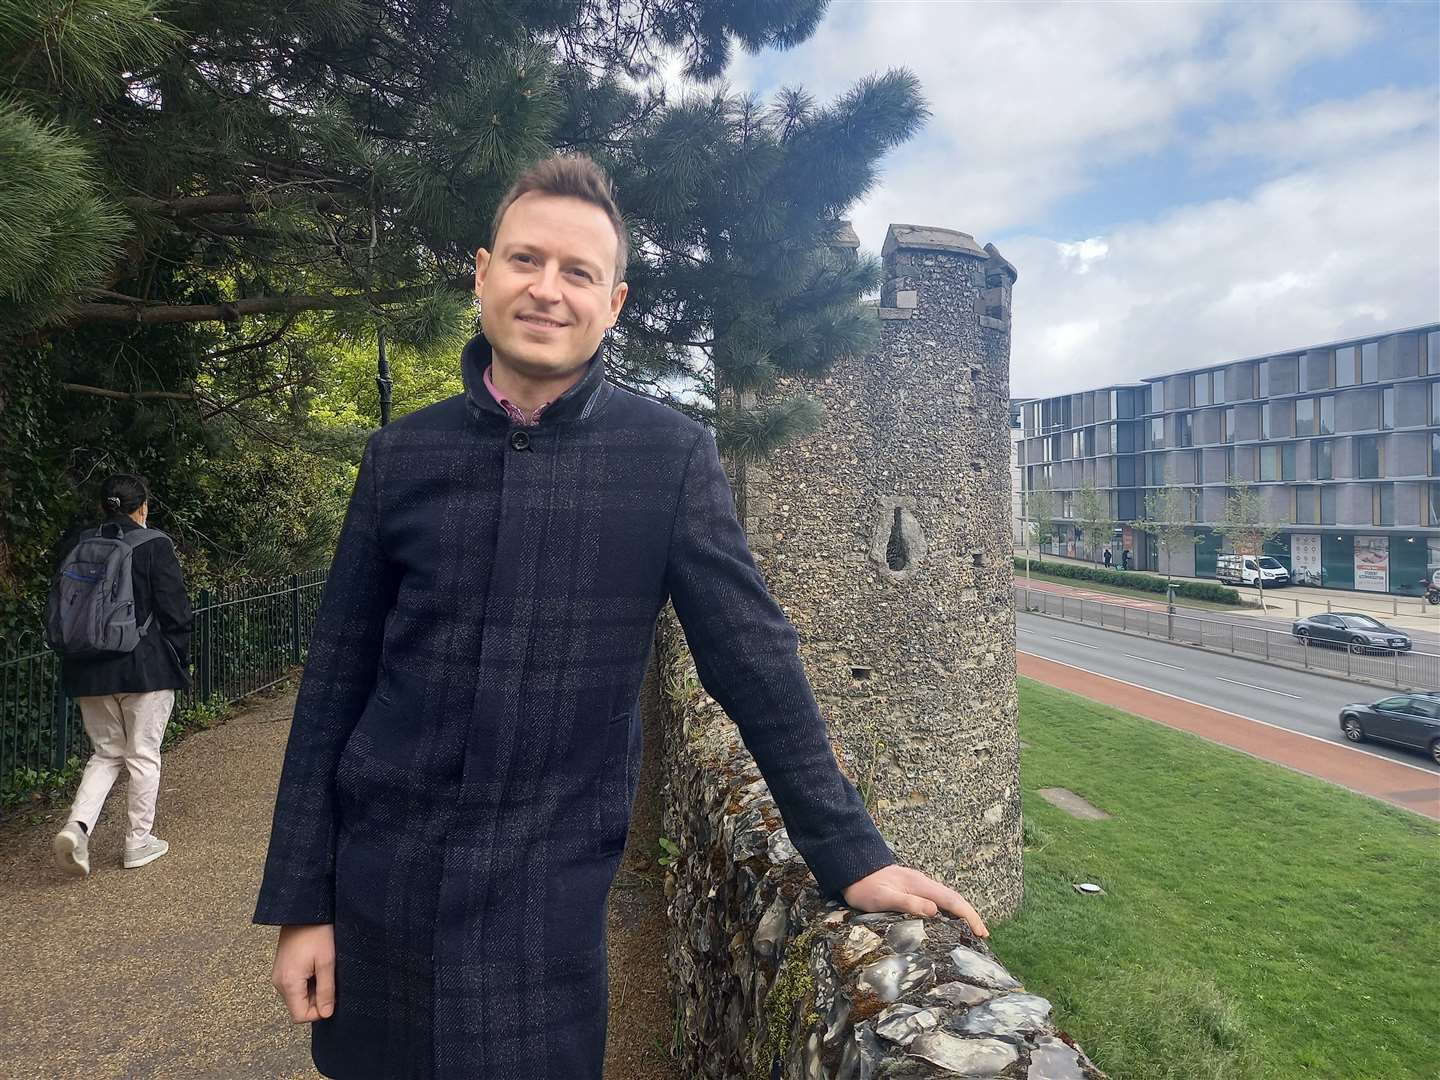 Canterbury City Council leader Cllr Ben Fitter-Harding says the city wall can be transformed